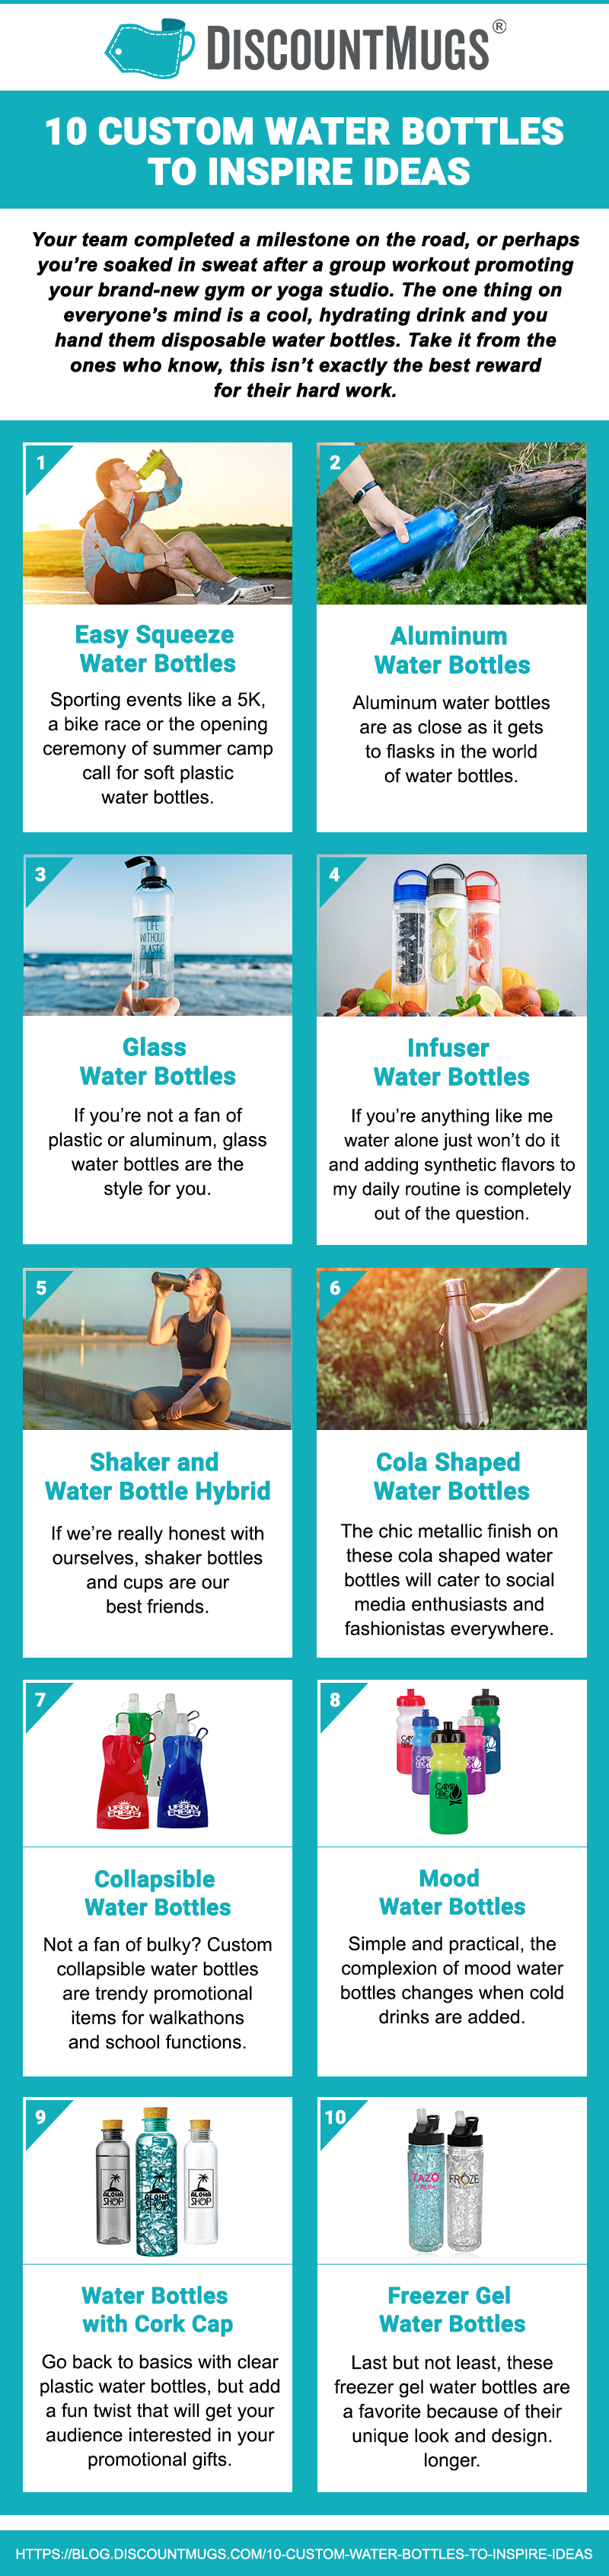 Custom Water Bottles Buying Guide Infographic